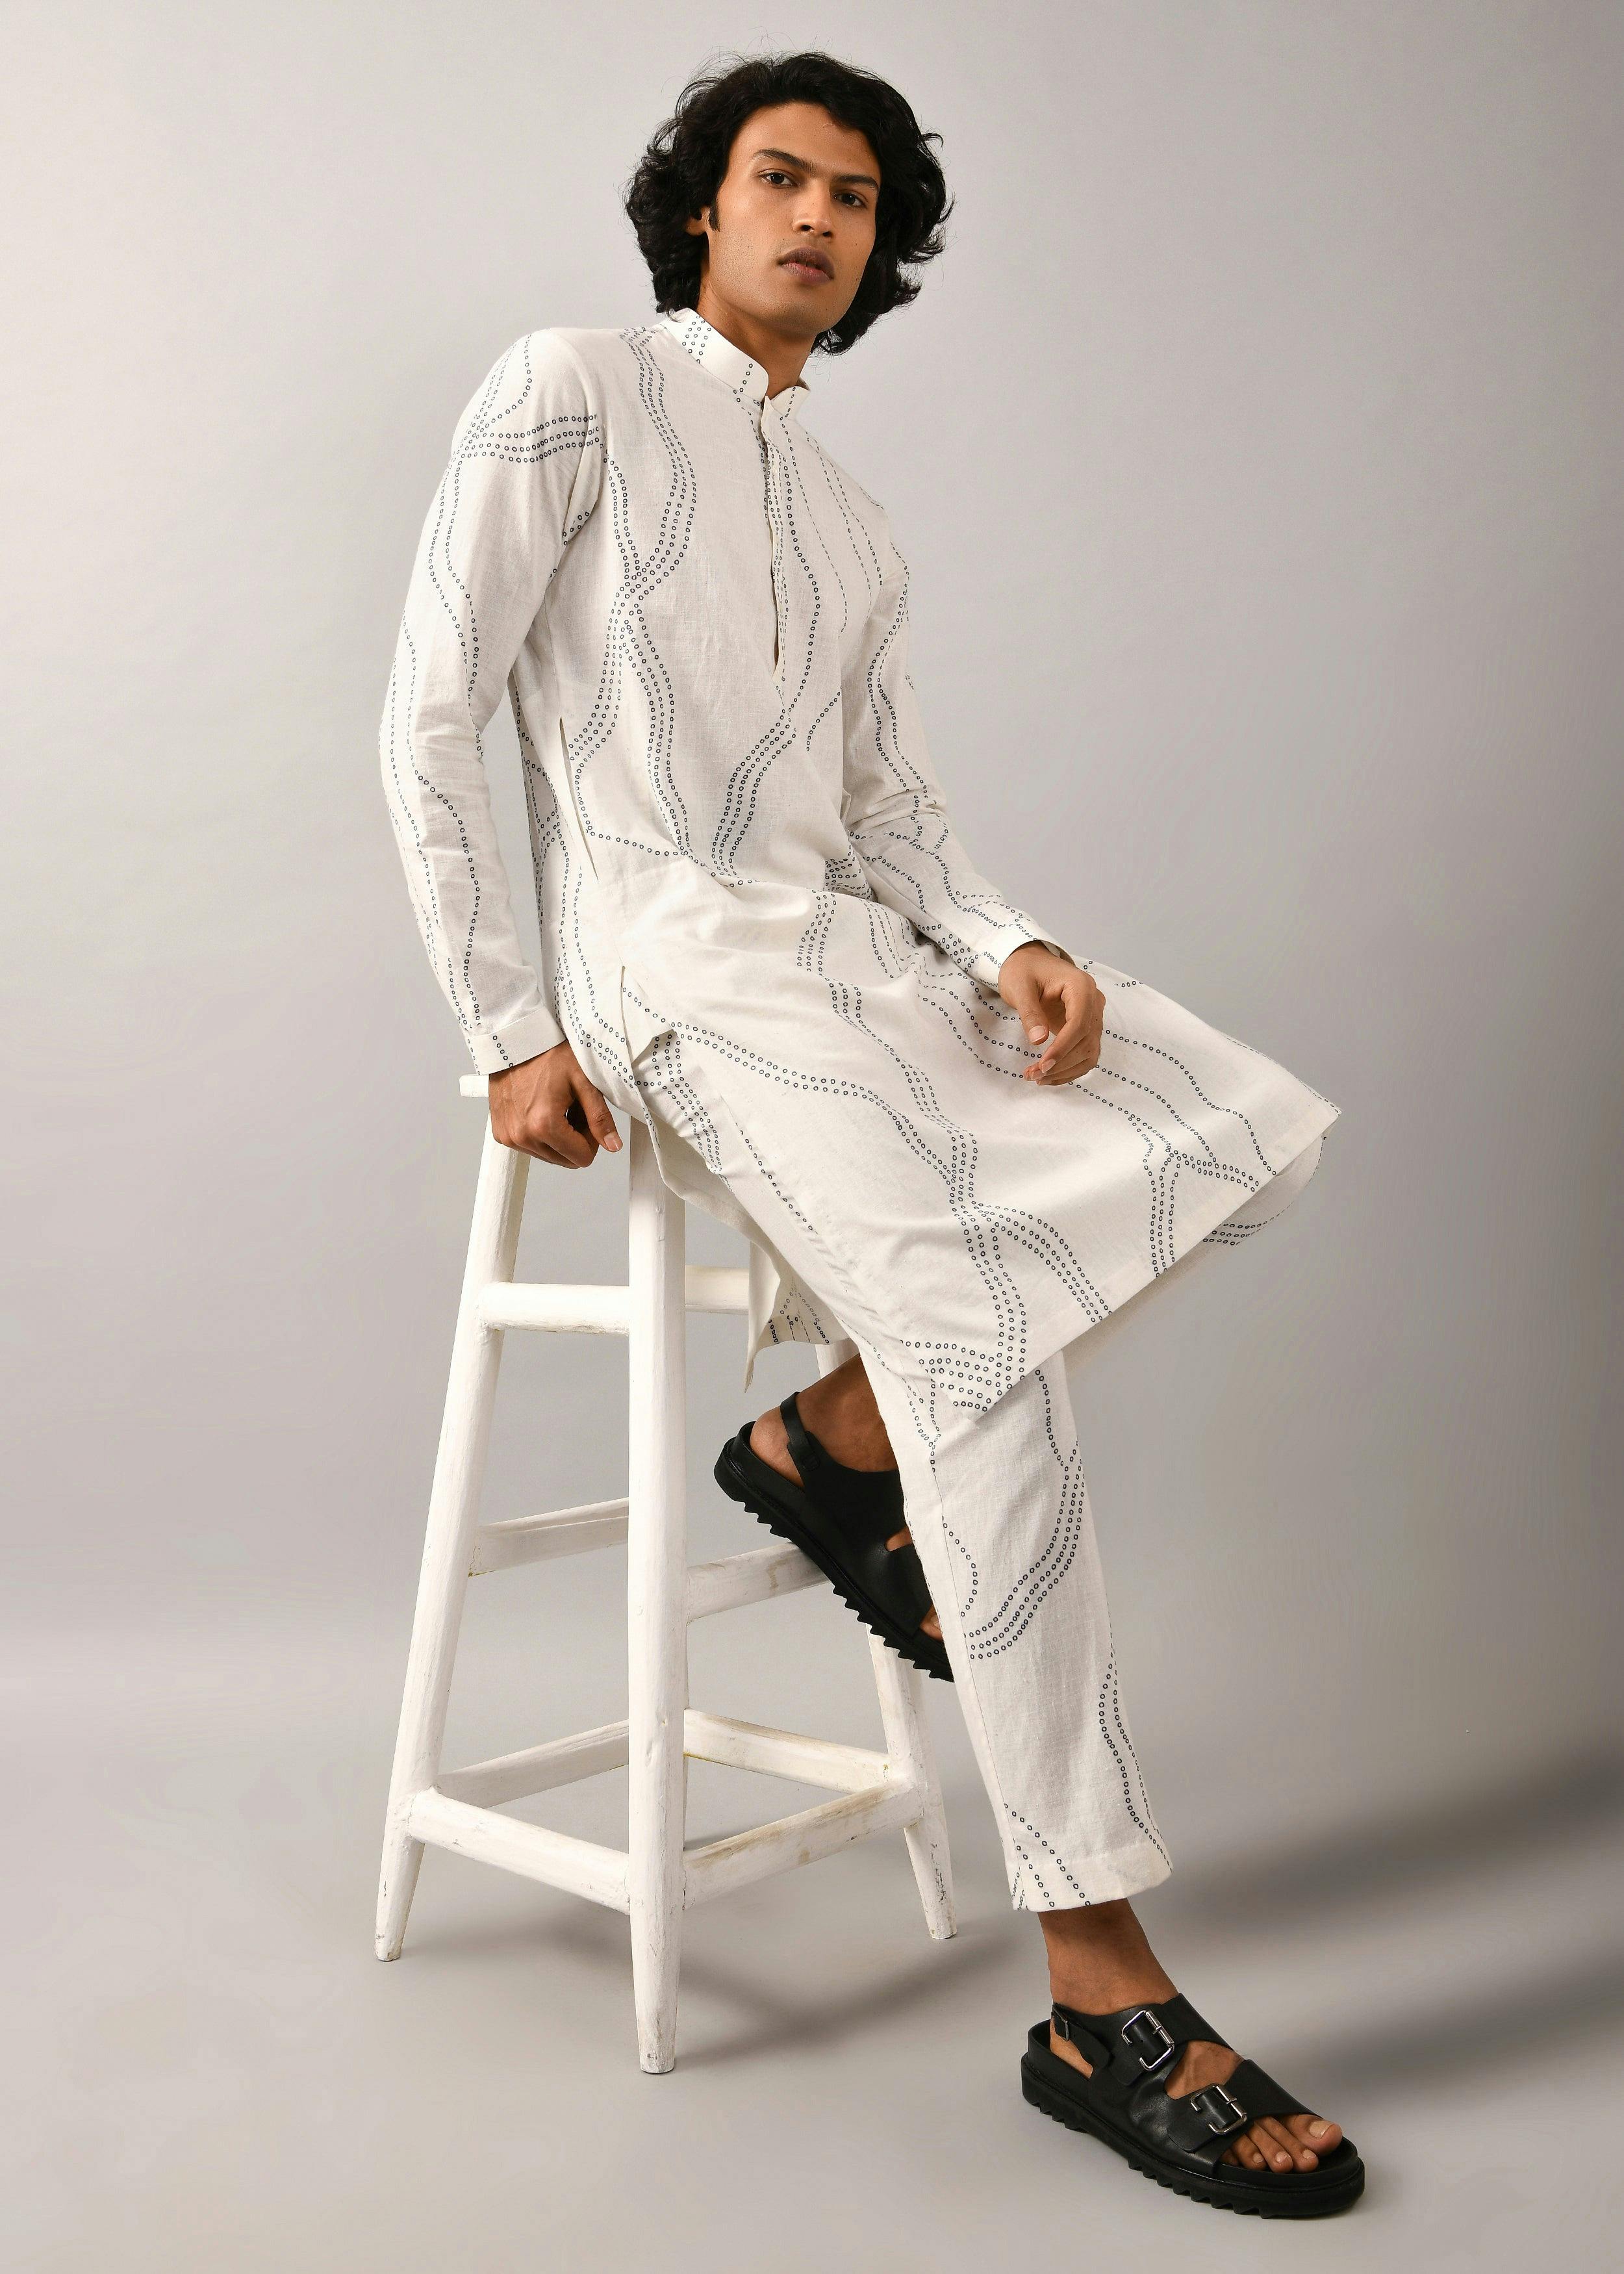 Constellation Lounge Printed Kurta Set, a product by Country Made